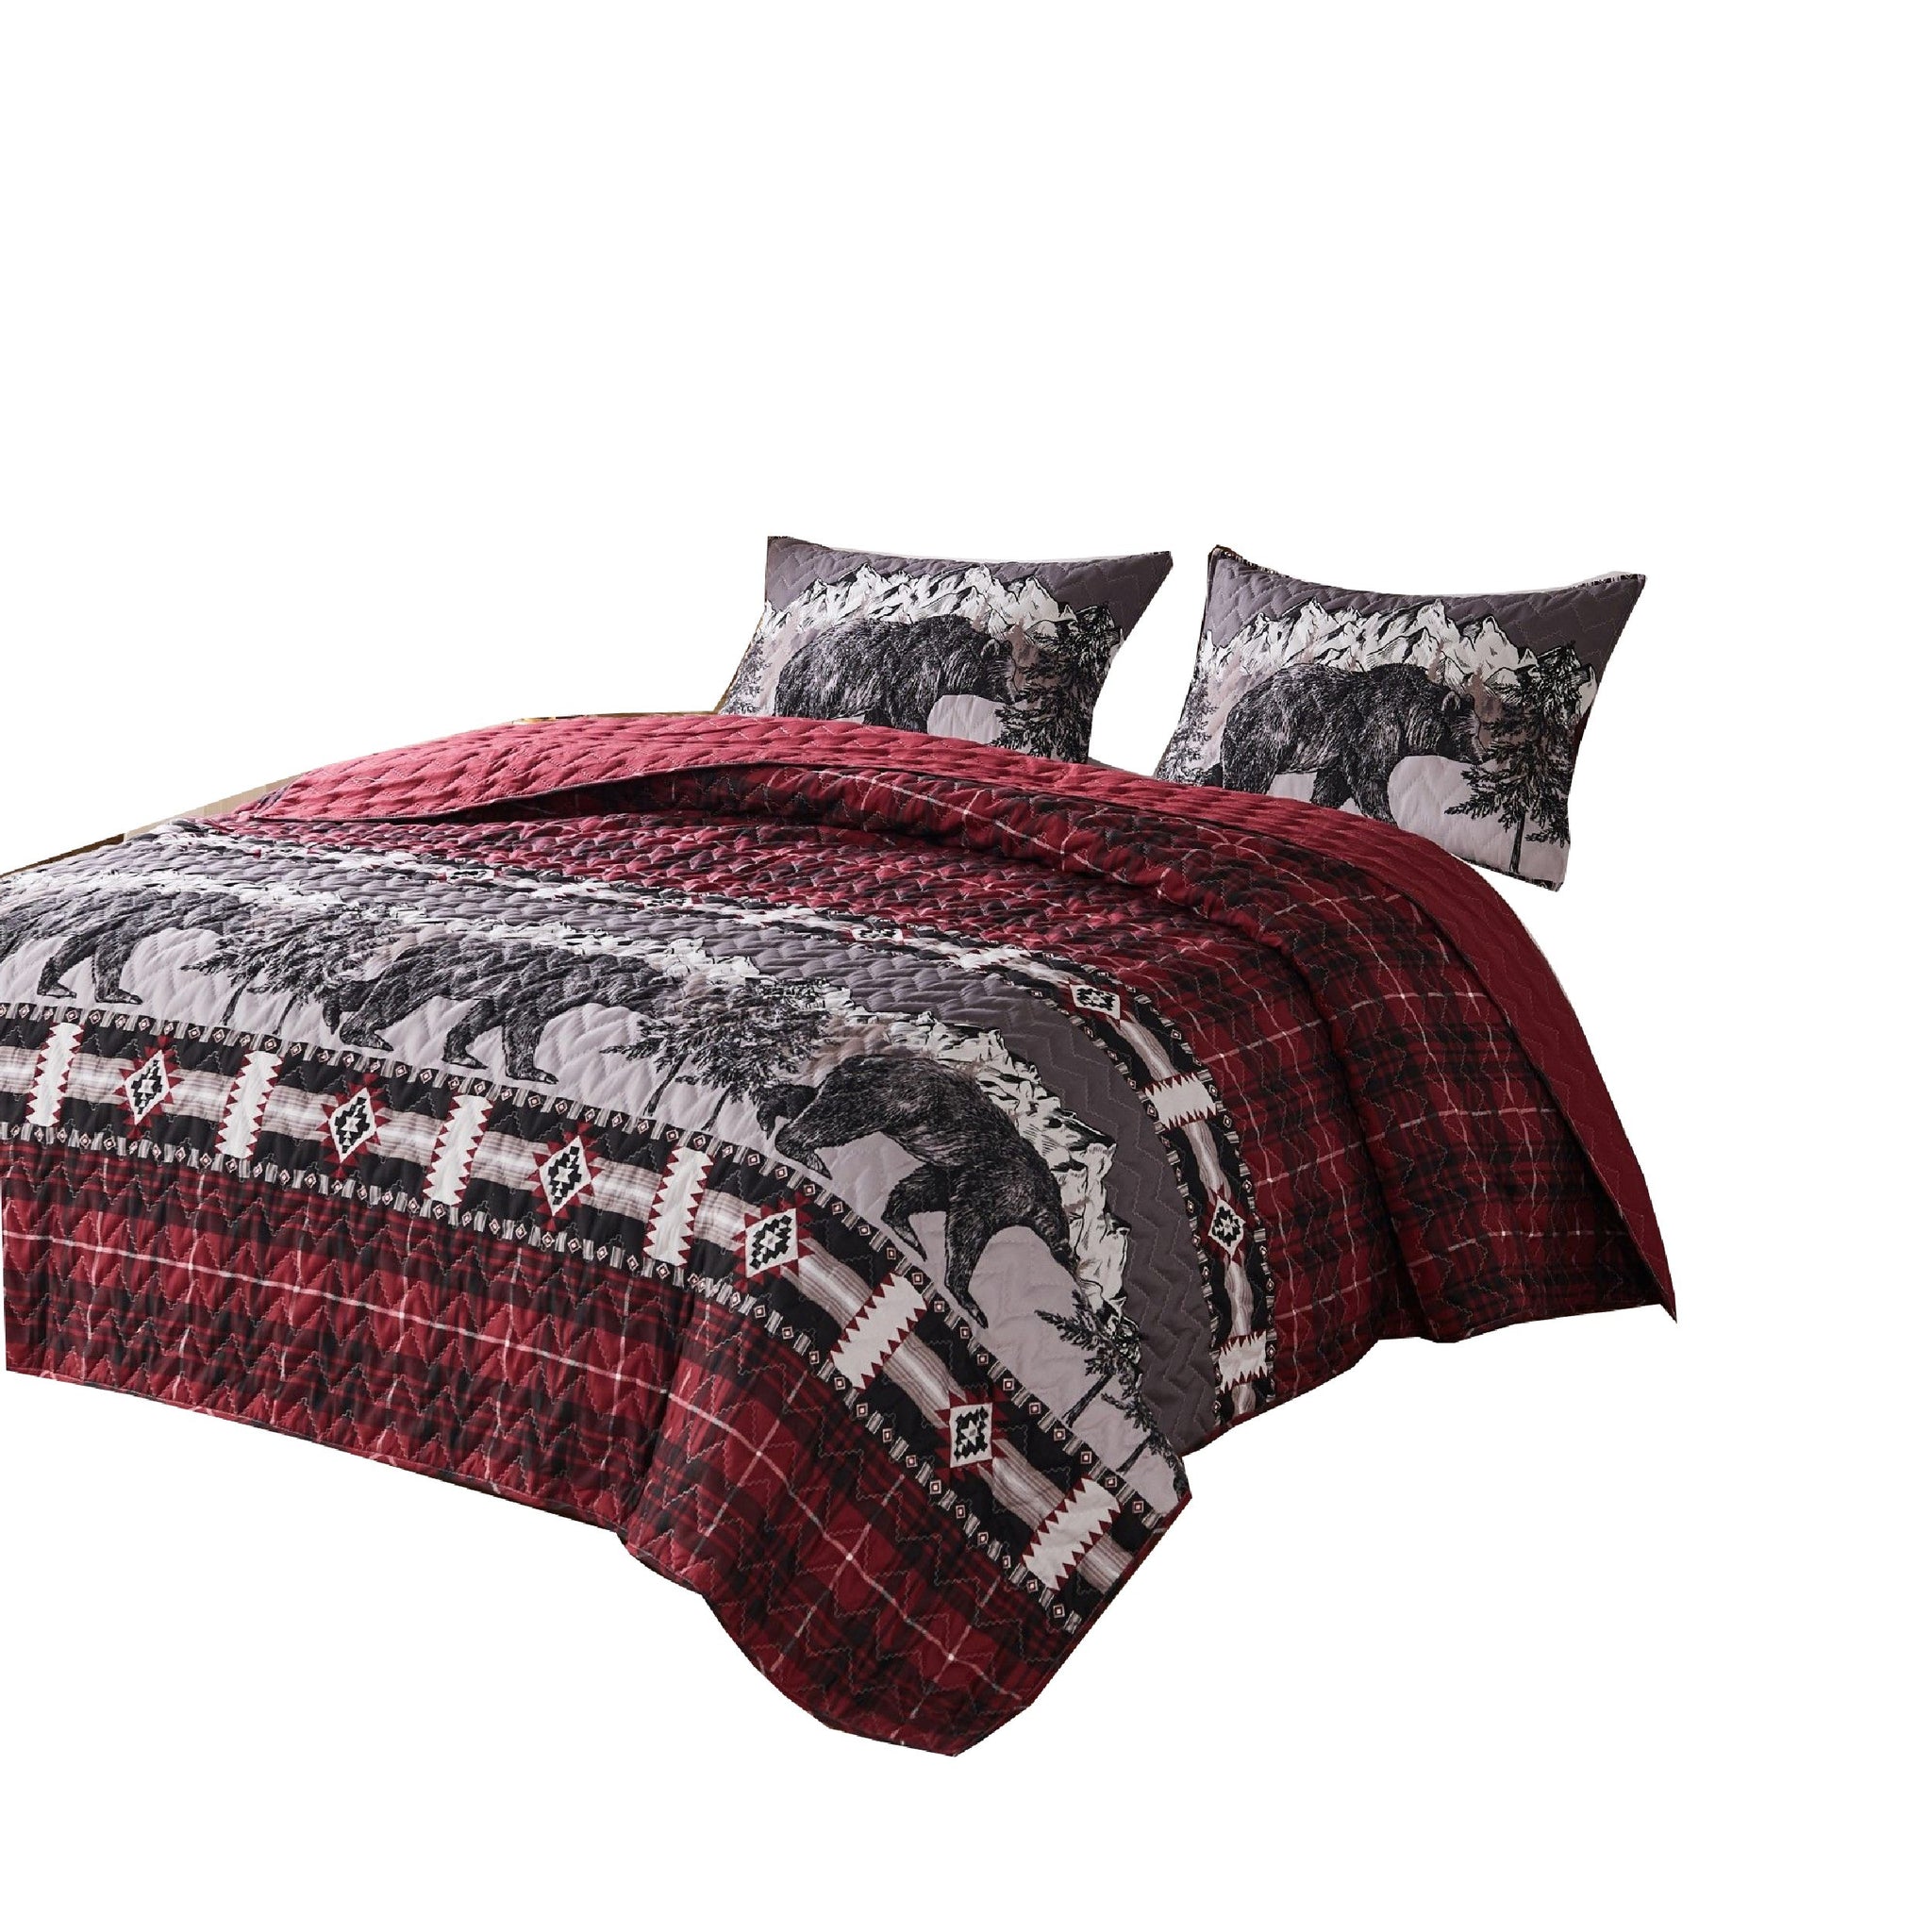 2 Piece Twin Quilt Set with Bear and Plaid